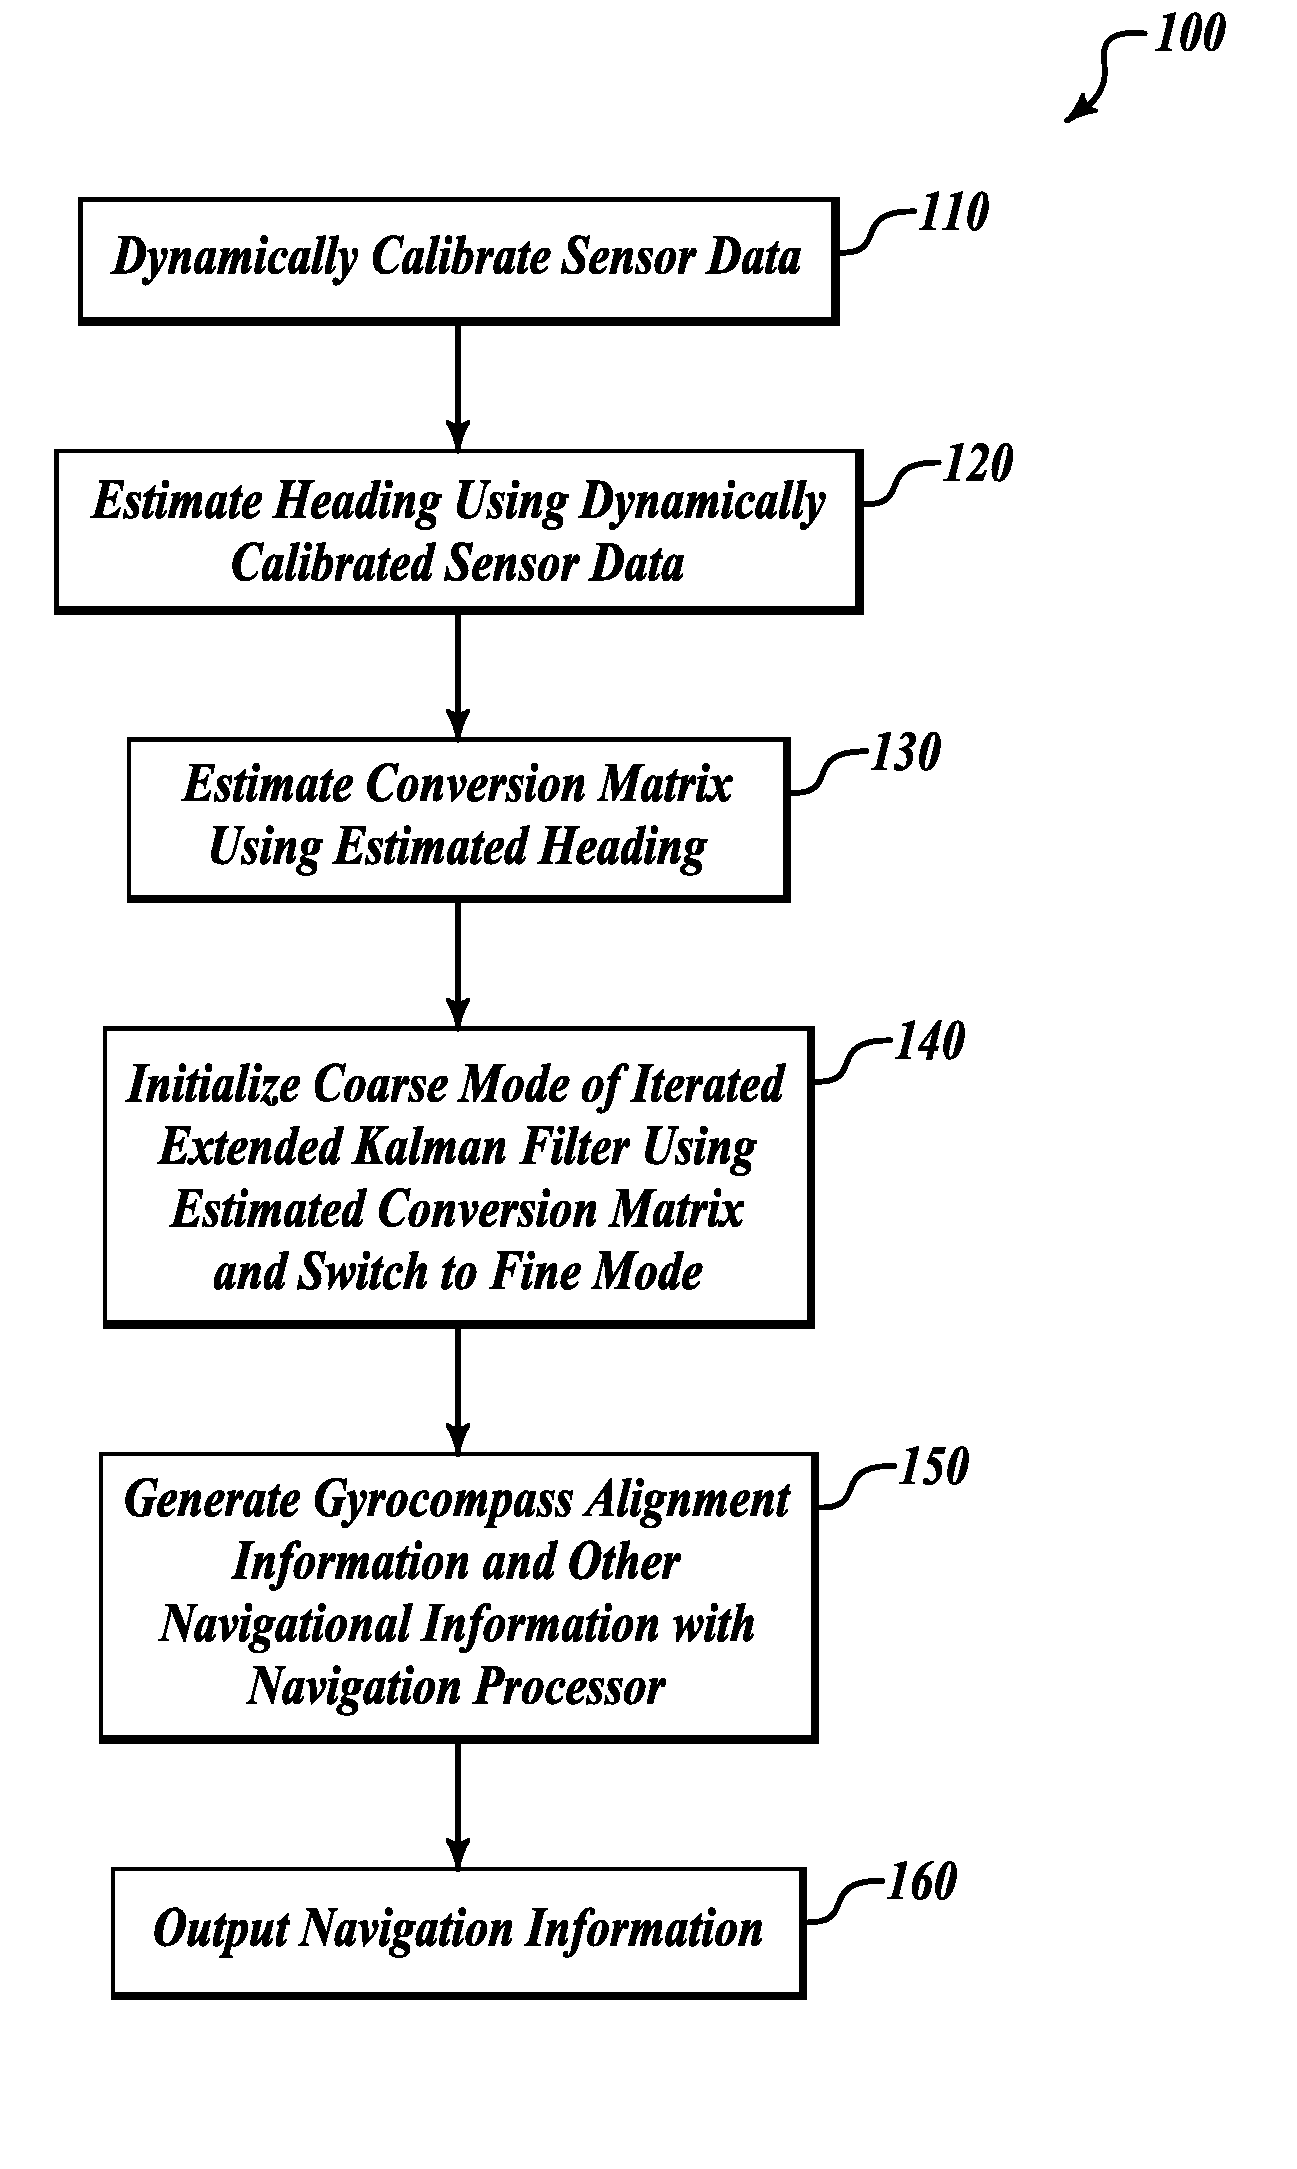 Systems and methods for gyrocompass alignment using dynamically calibrated sensor data and an iterated extended kalman filter within a navigation system